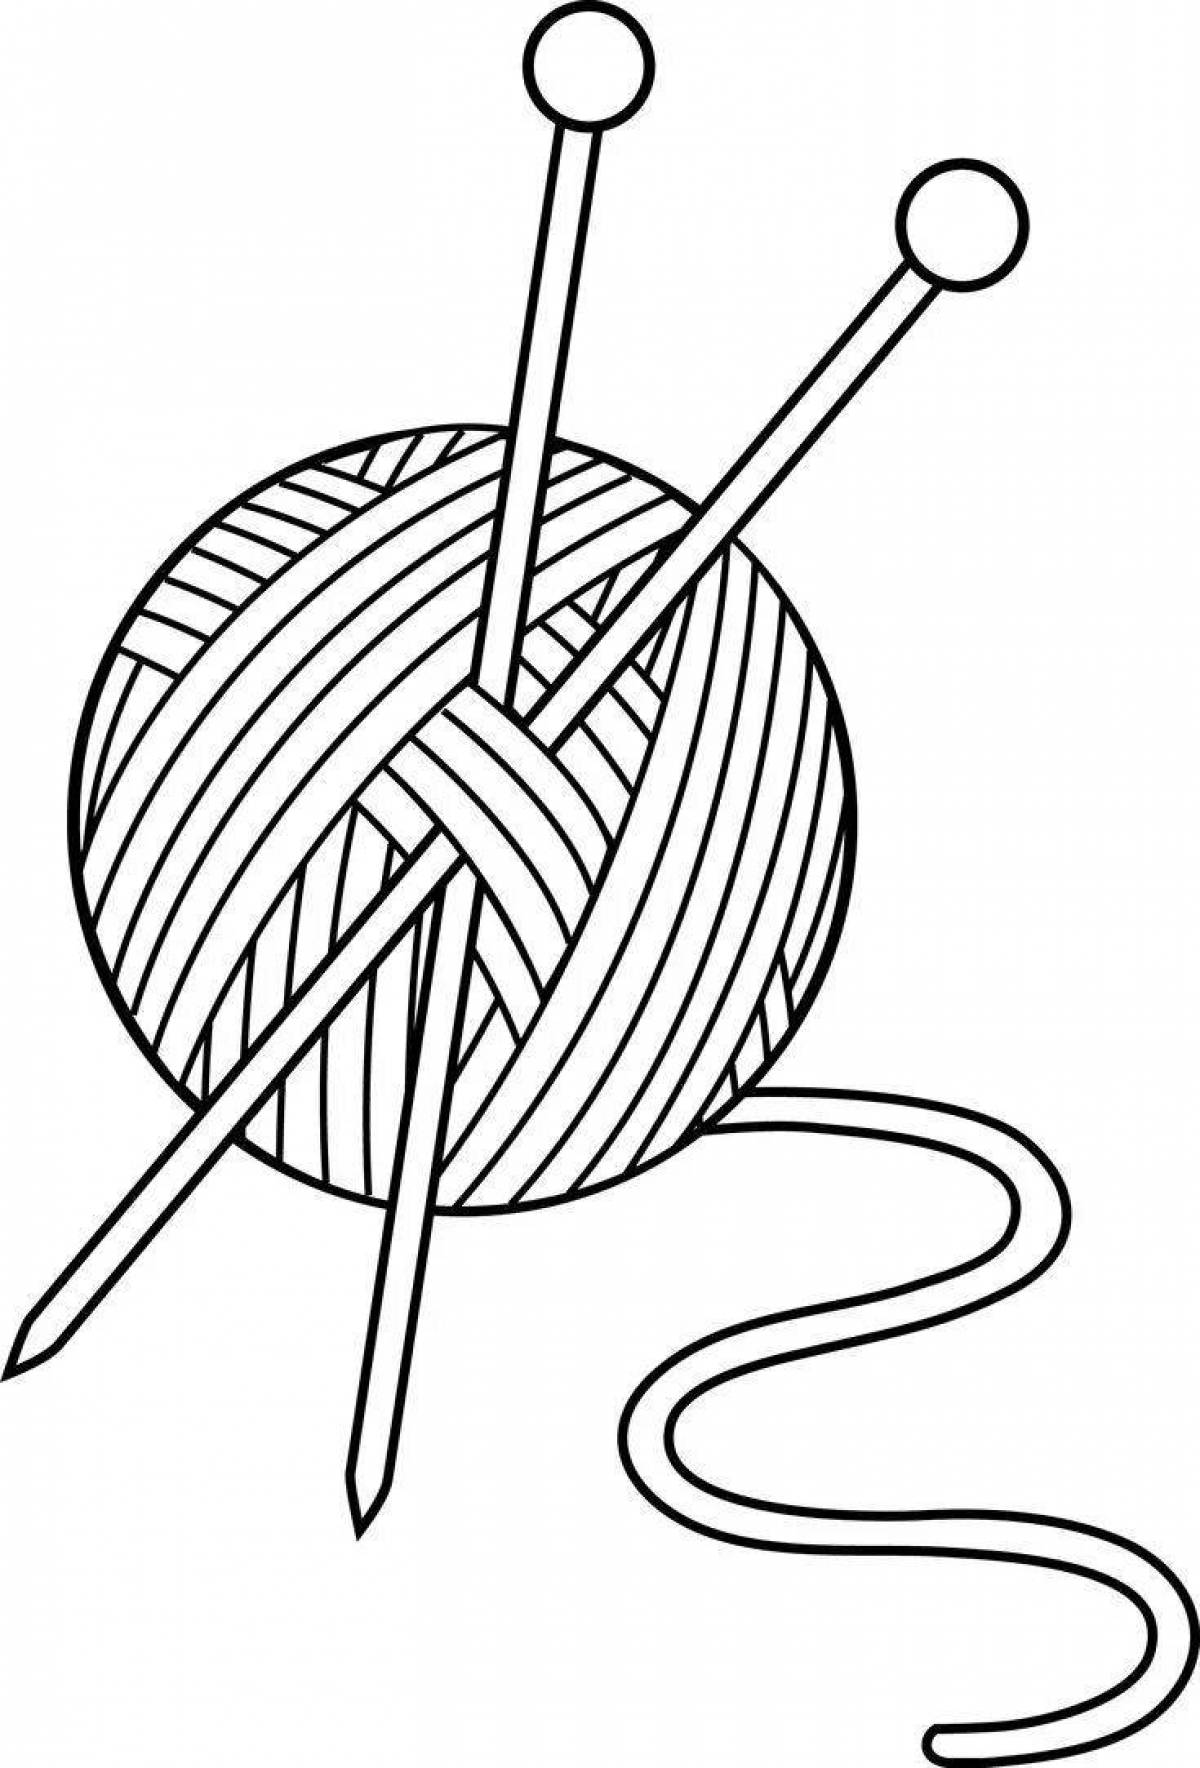 Coloring threads for kids